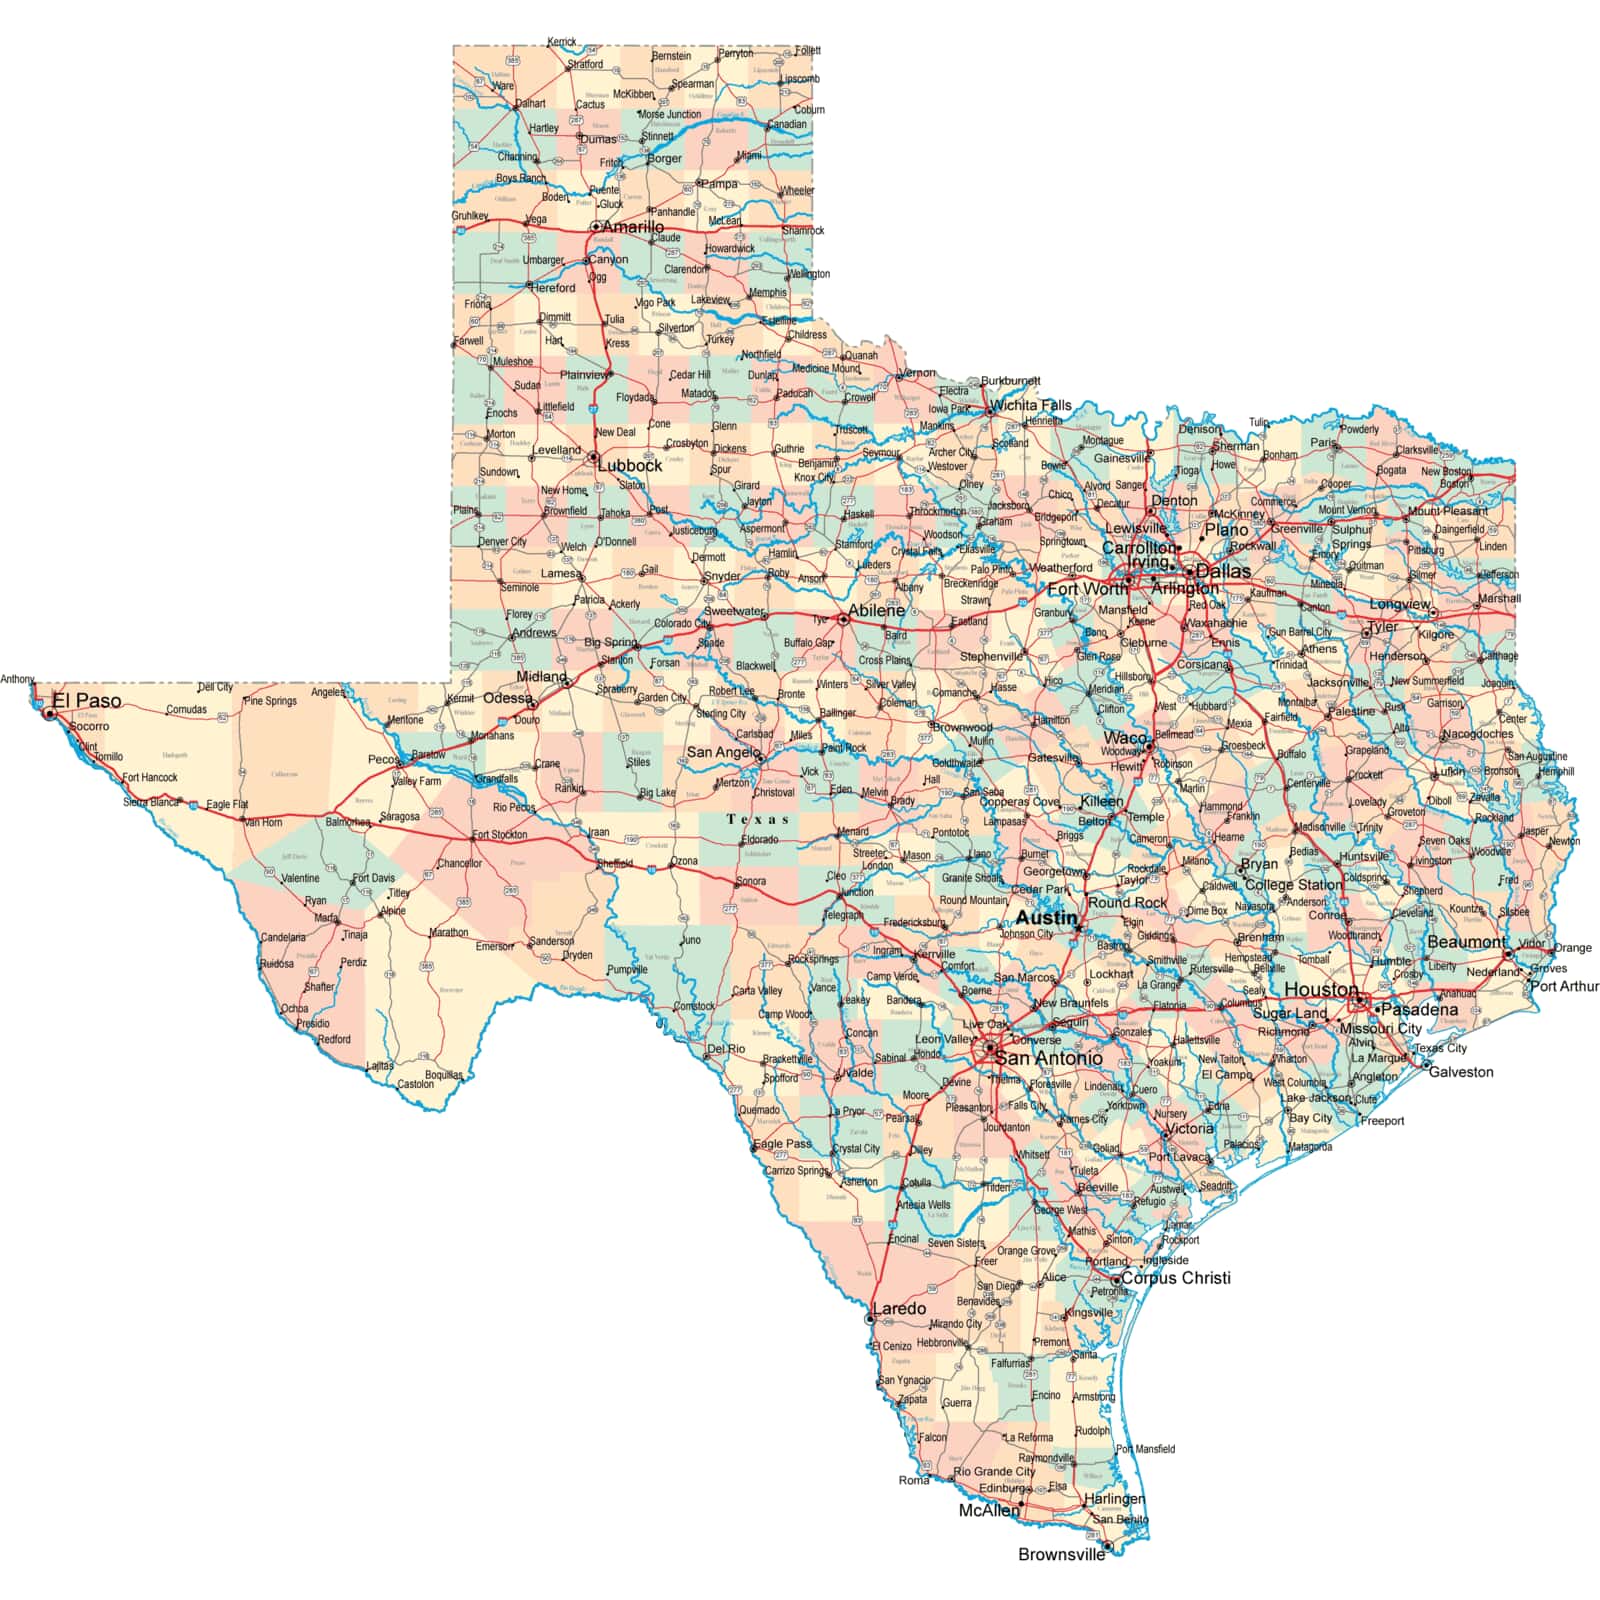 Map Of Texas Roads And Highways Texas Road Map   TX Road Map   Texas Highway Map